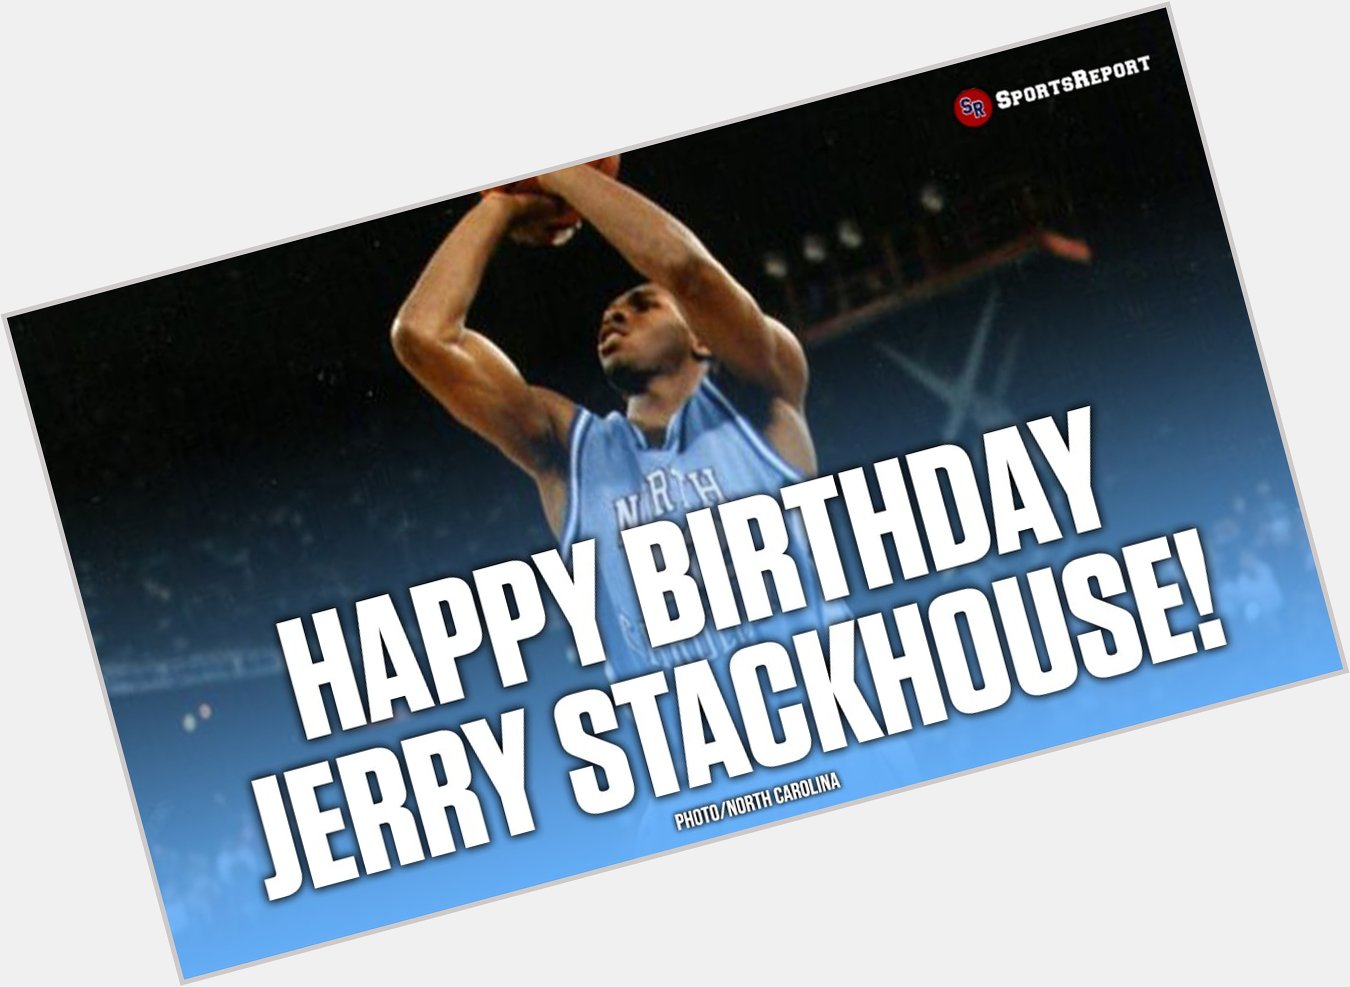  Fans, let\s wish Jerry Stackhouse a Happy Birthday! GO 